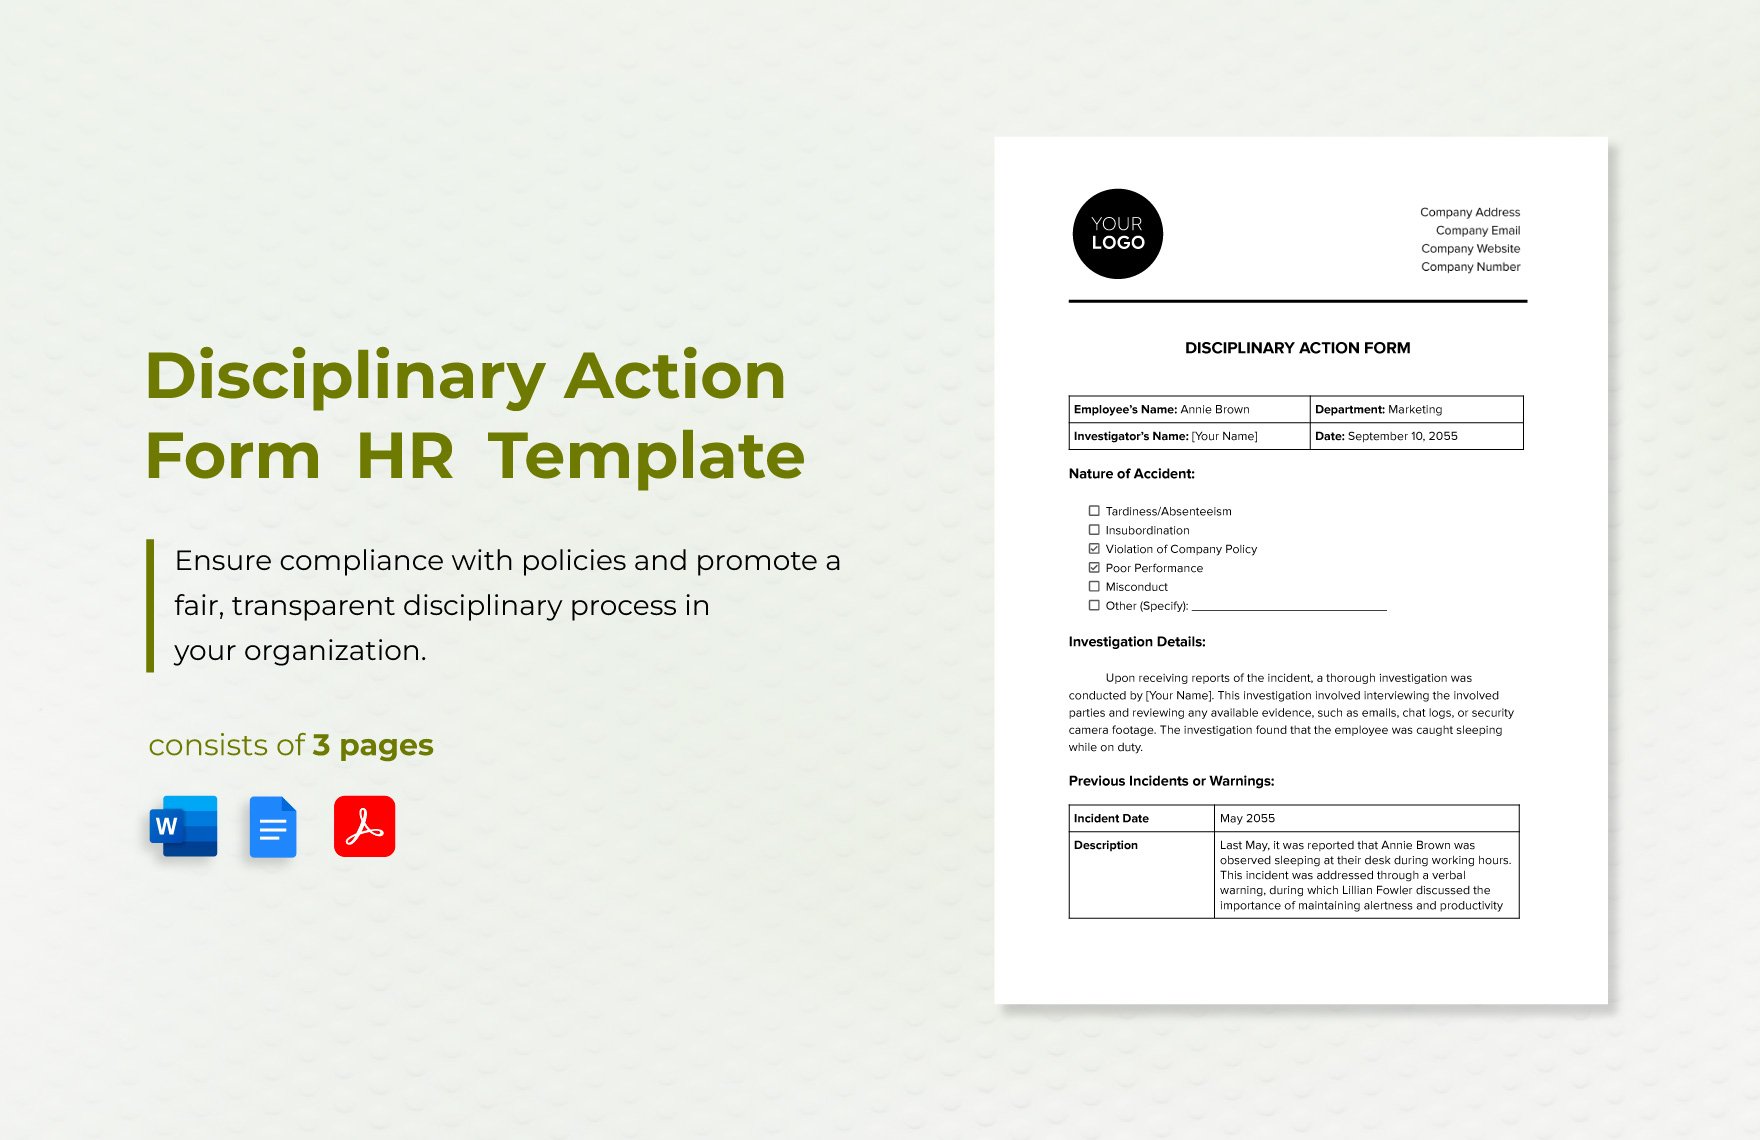 Disciplinary Action Form HR Template